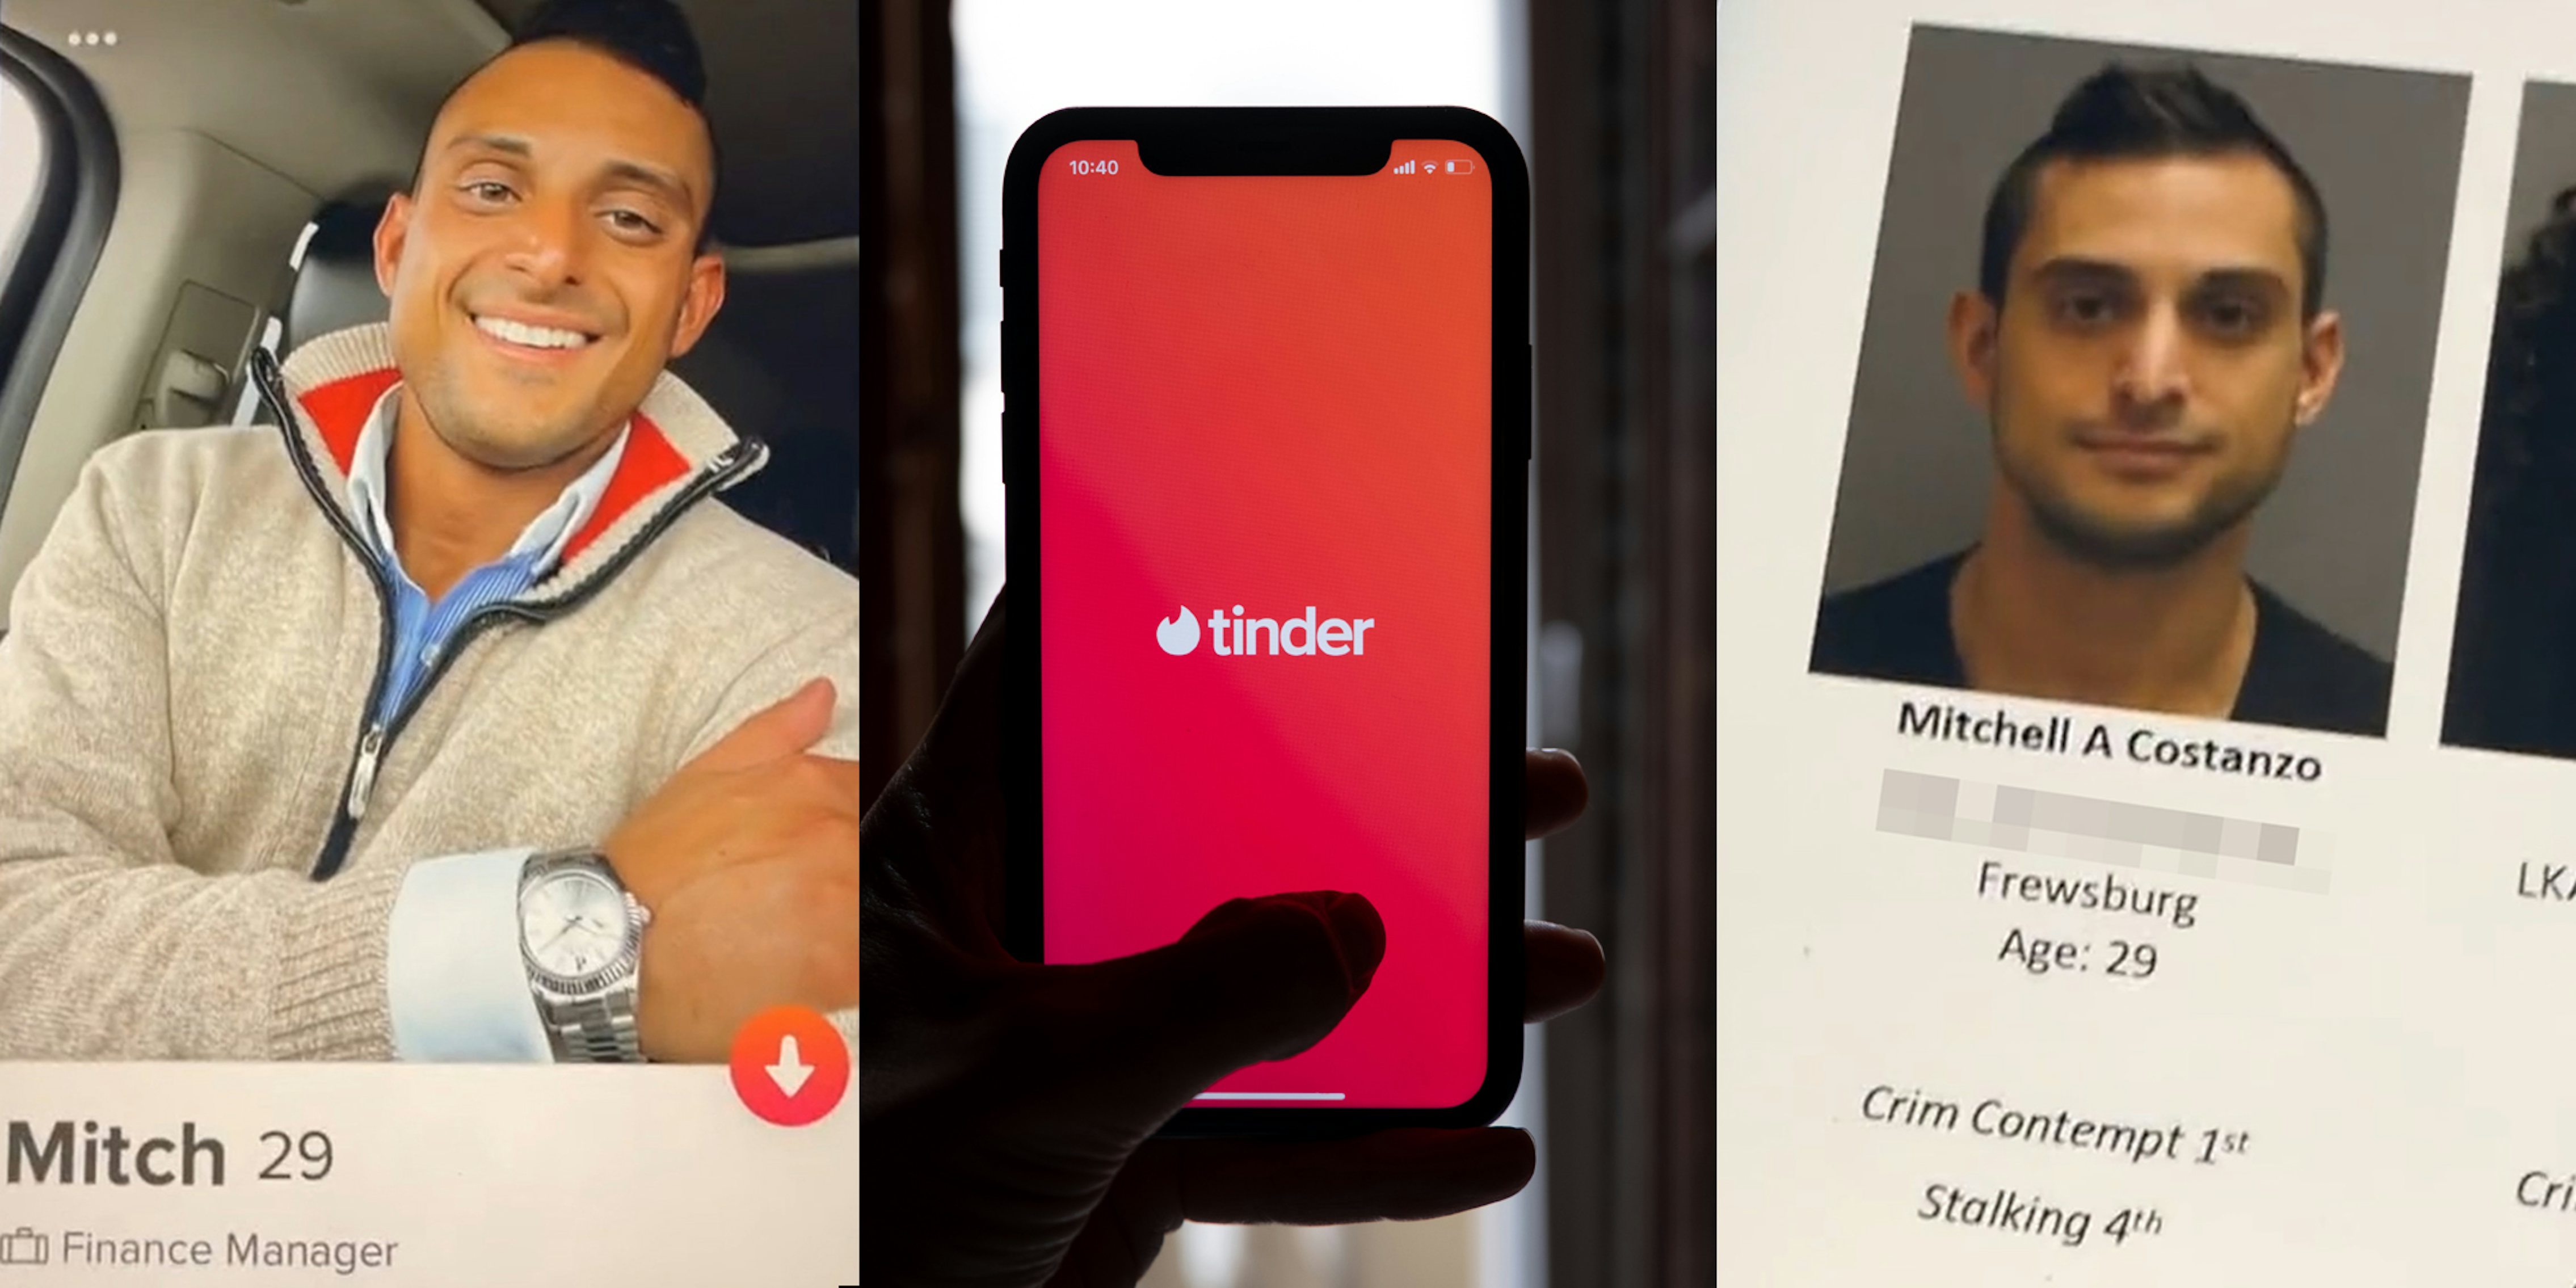 Man Tinder profile 'Mitch' (l) hand holding phone with Tinder on screen (c) man on Wanted list 'Mitchell A Costanzo Crim Contempr 1st Stalking 4th' (r)